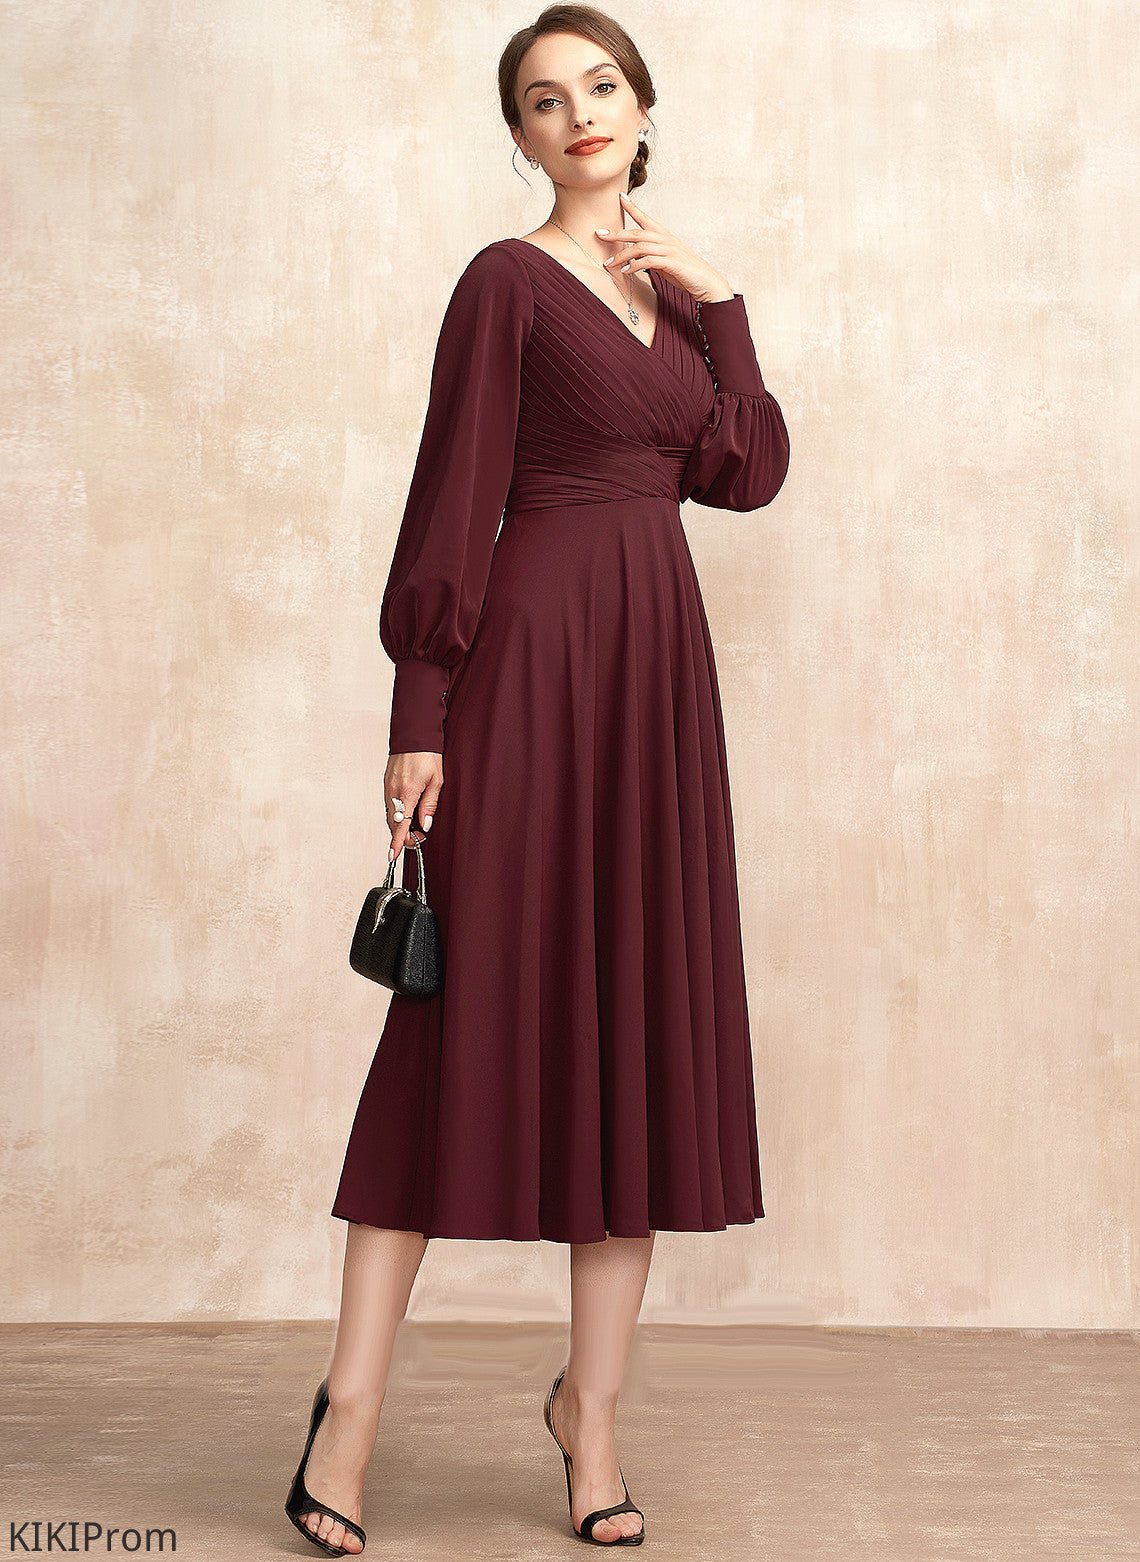 With Dress of Tea-Length Zara Ruffle Bride Mother of the Bride Dresses the V-neck Mother A-Line